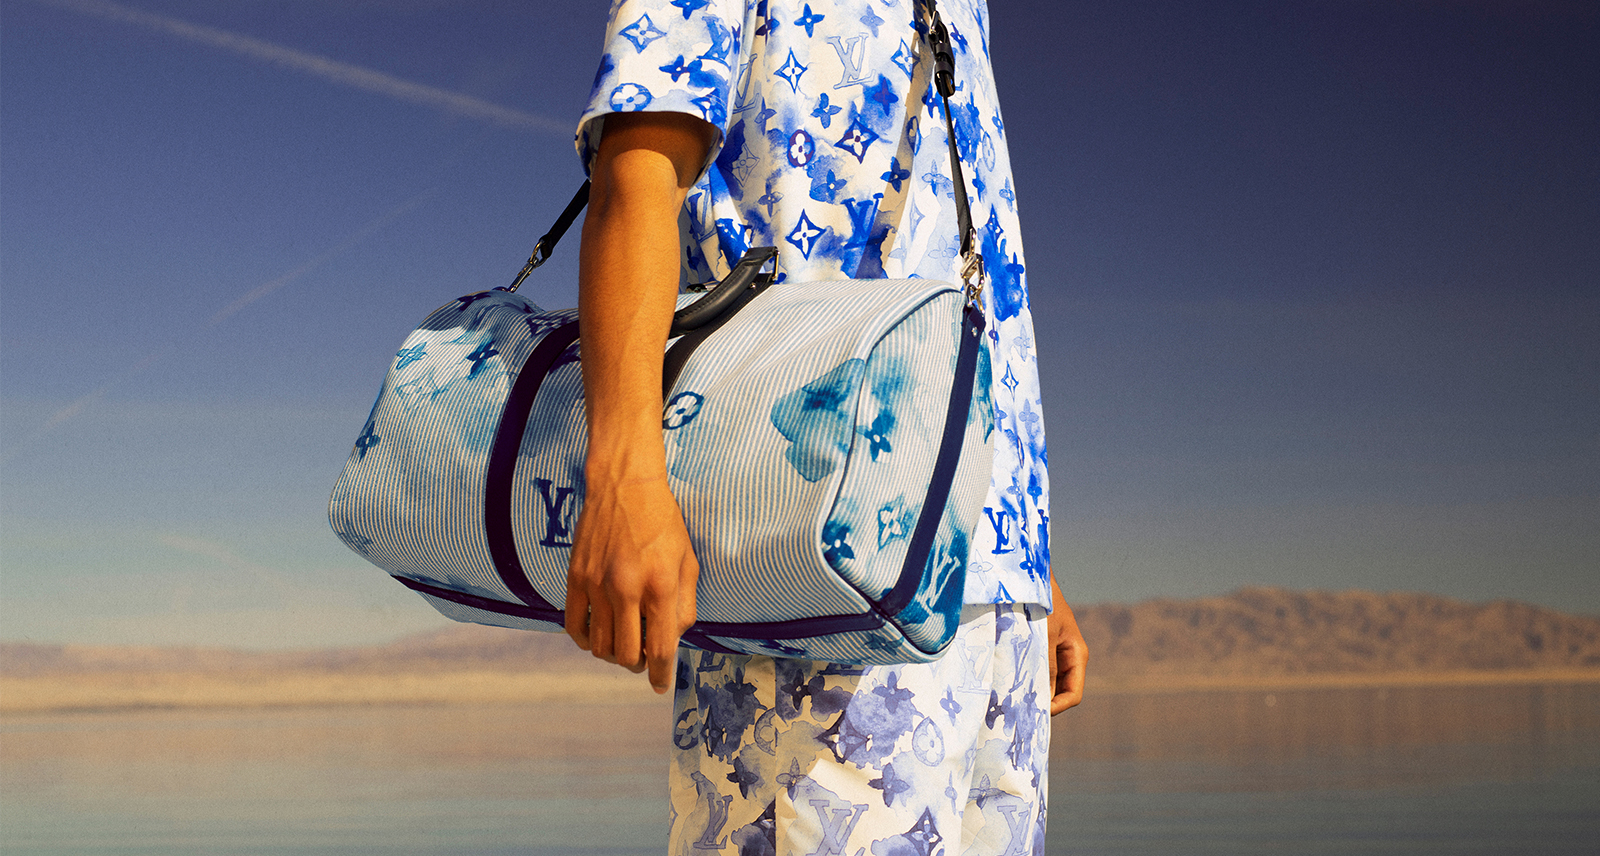 Louis Vuitton's Summer Collection is Here For Better Weather